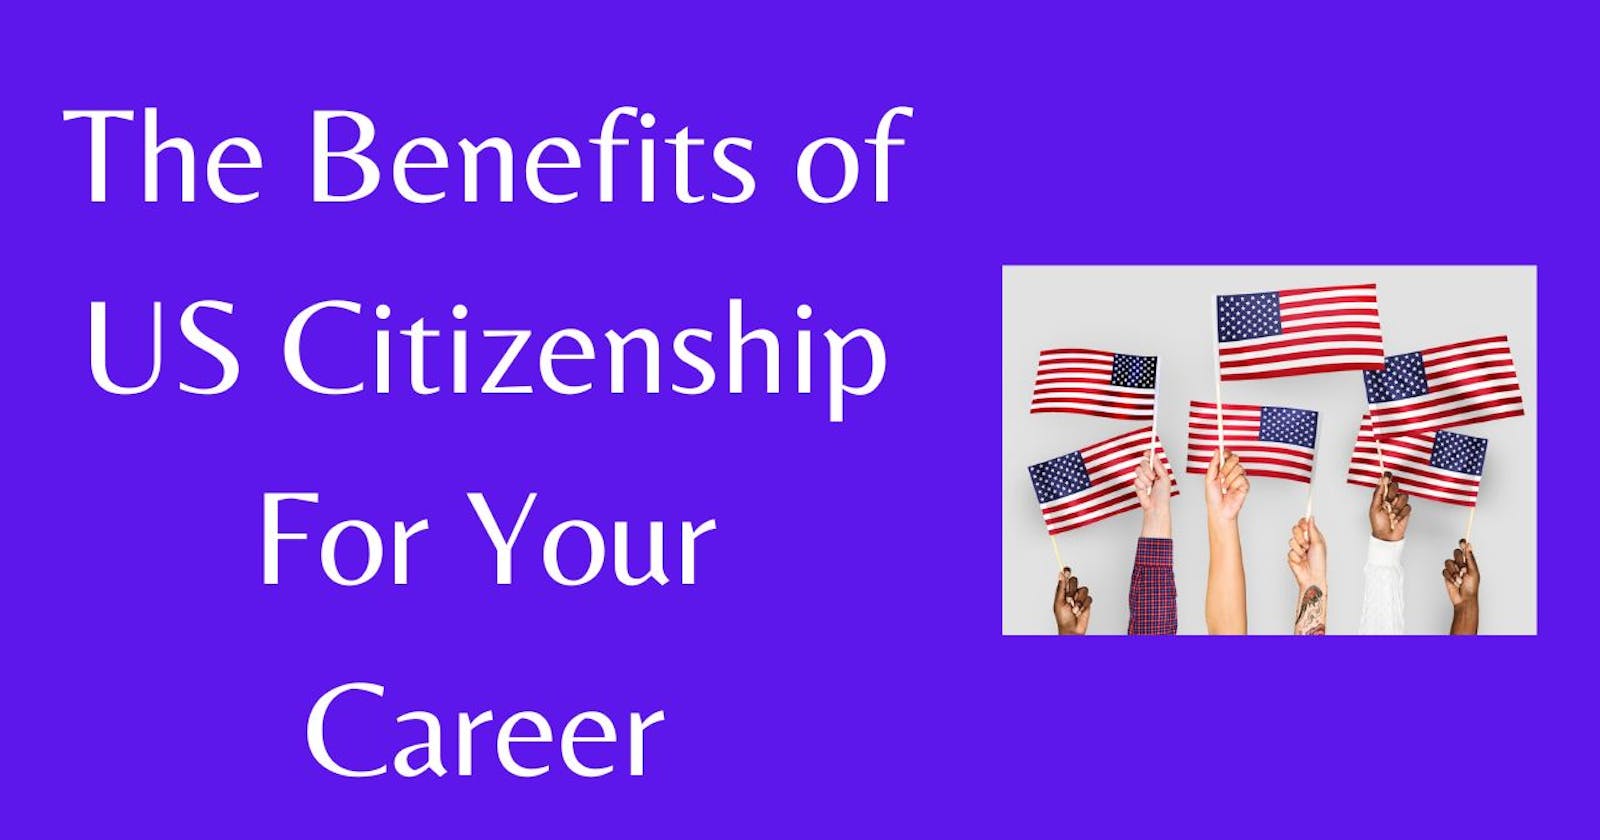 The Benefits of US Citizenship For Your Career